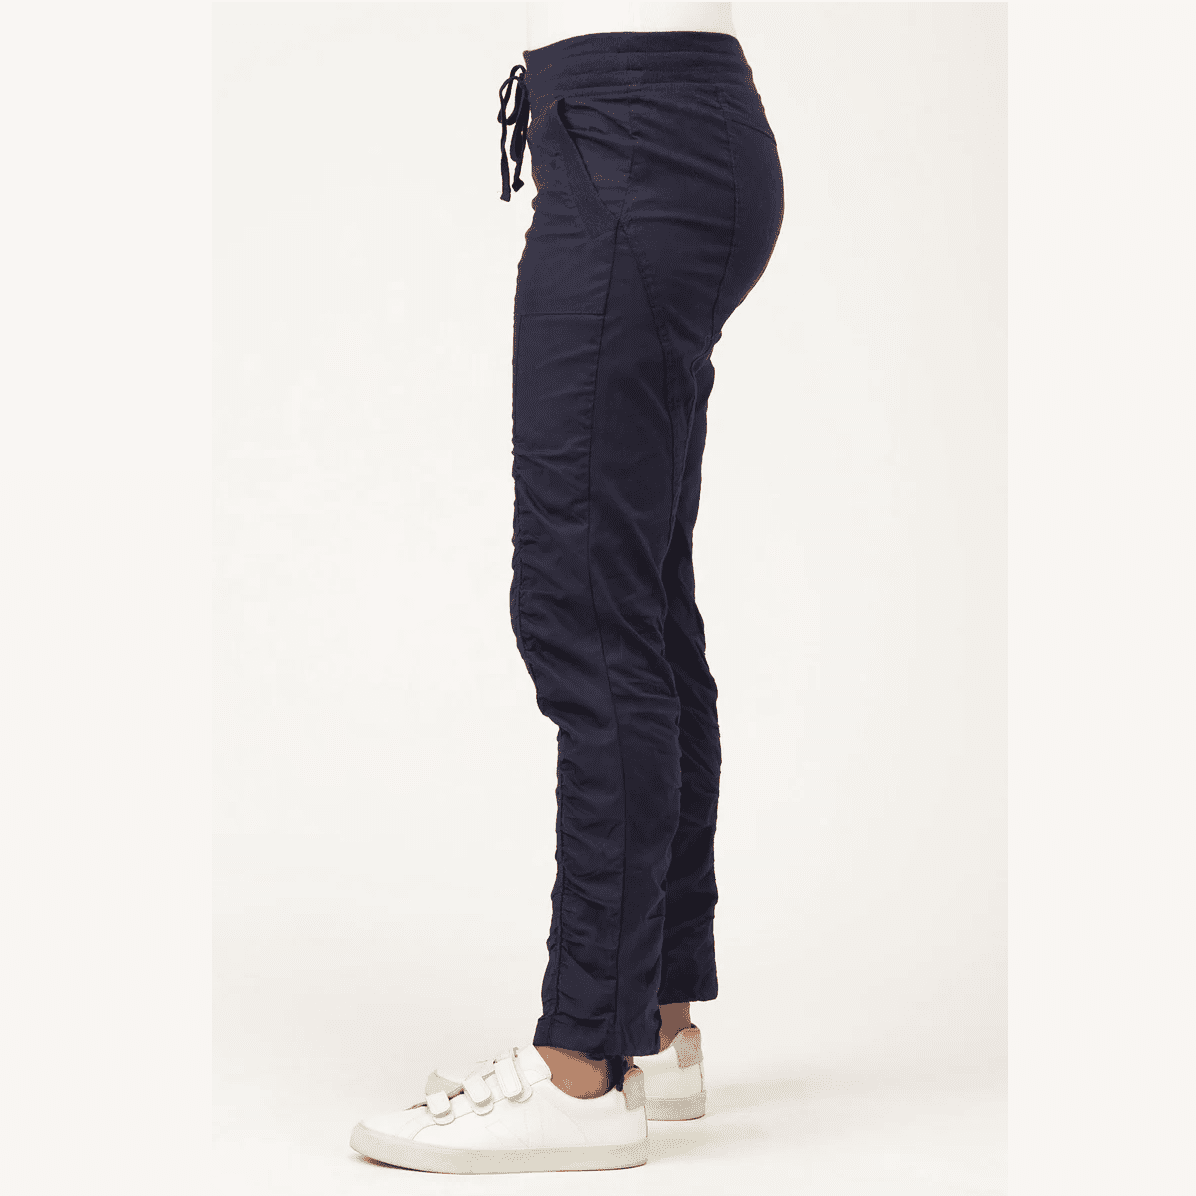 XCVI Wearables Jules Ruching Pants in Navy - Jaunts Boutique 